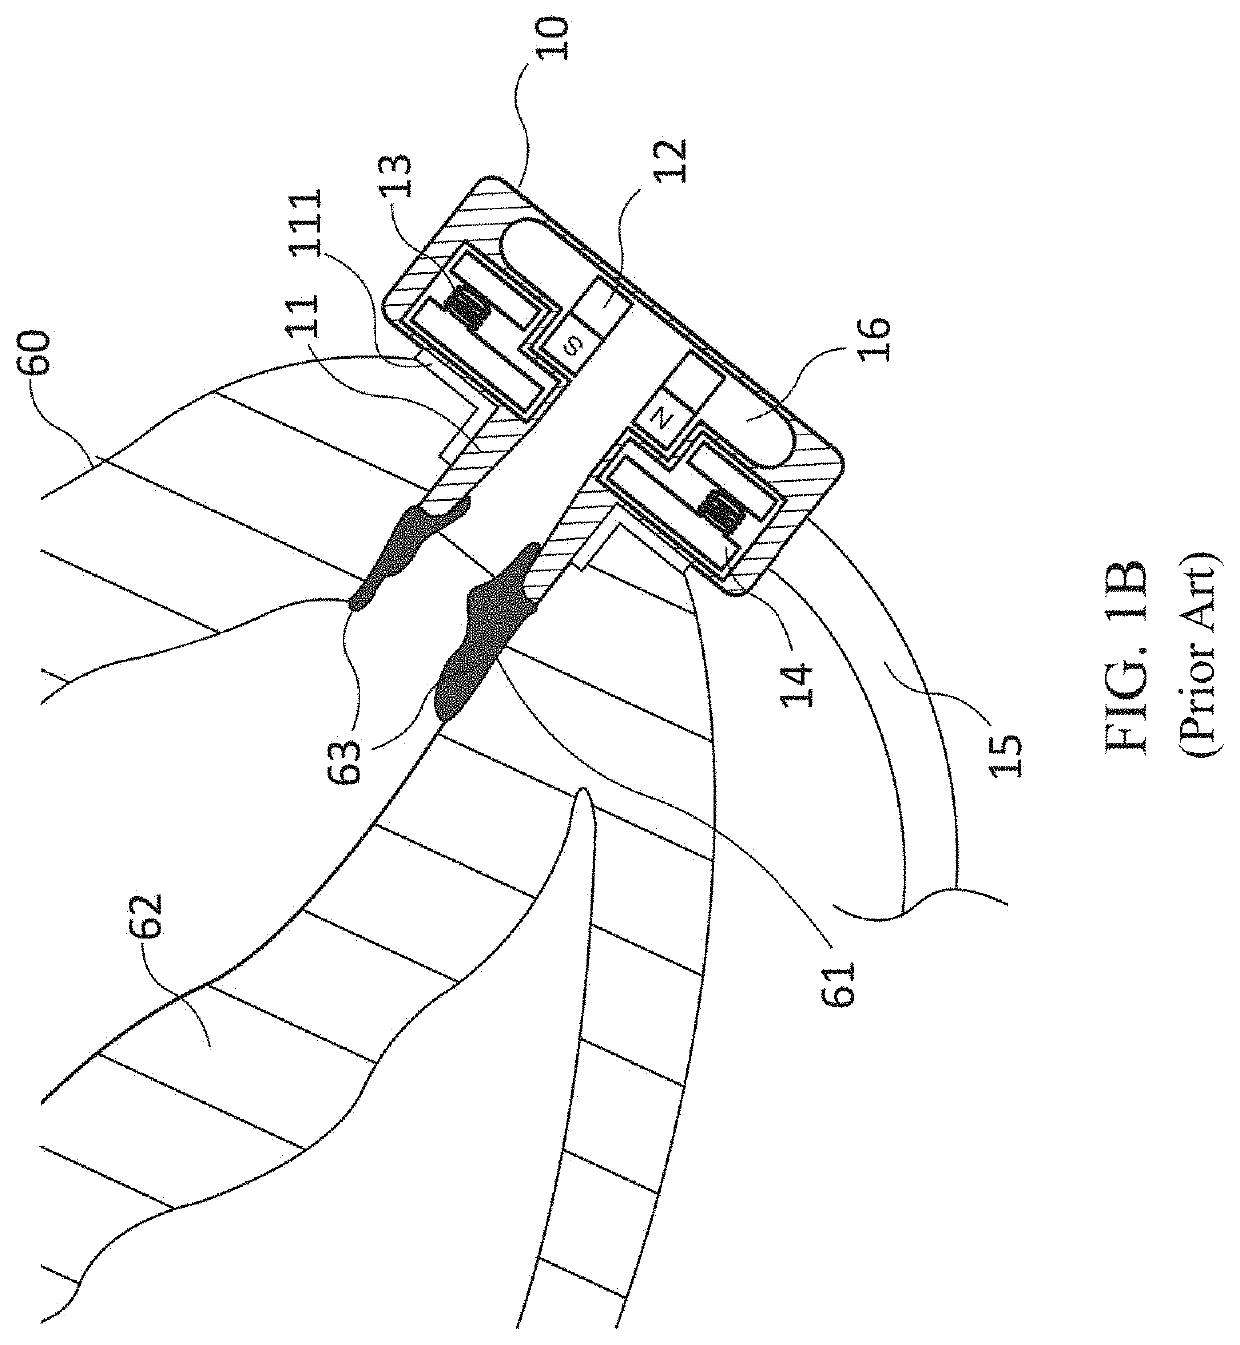 Sutureless inflow cannula assembly for connecting ventricular assist devices to human circulation